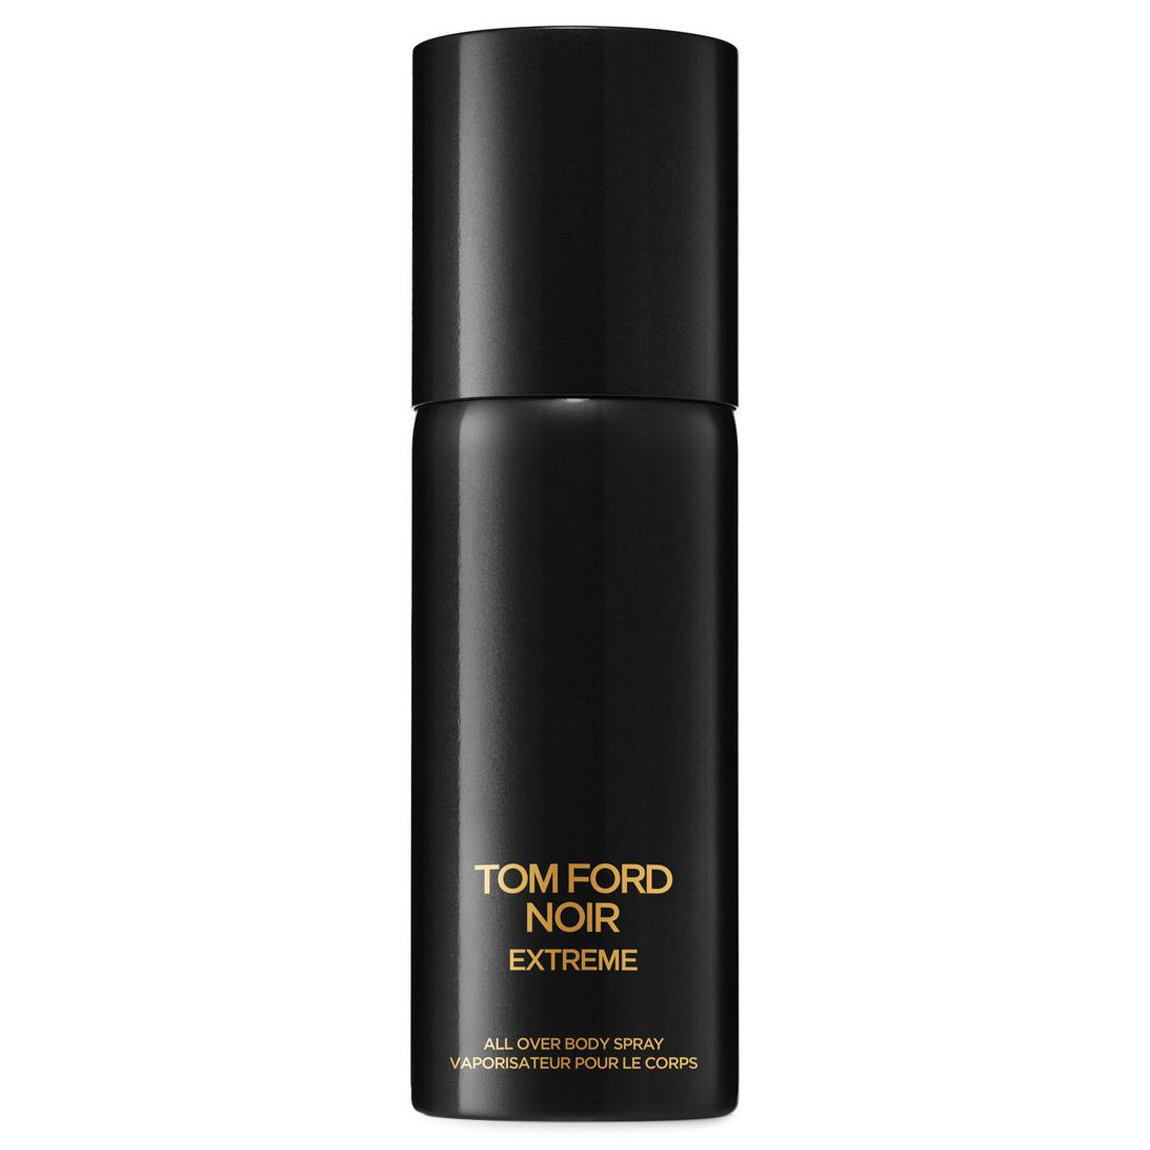 TOM FORD Noir Extreme All Over Body Spray alternative view 1 - product swatch.